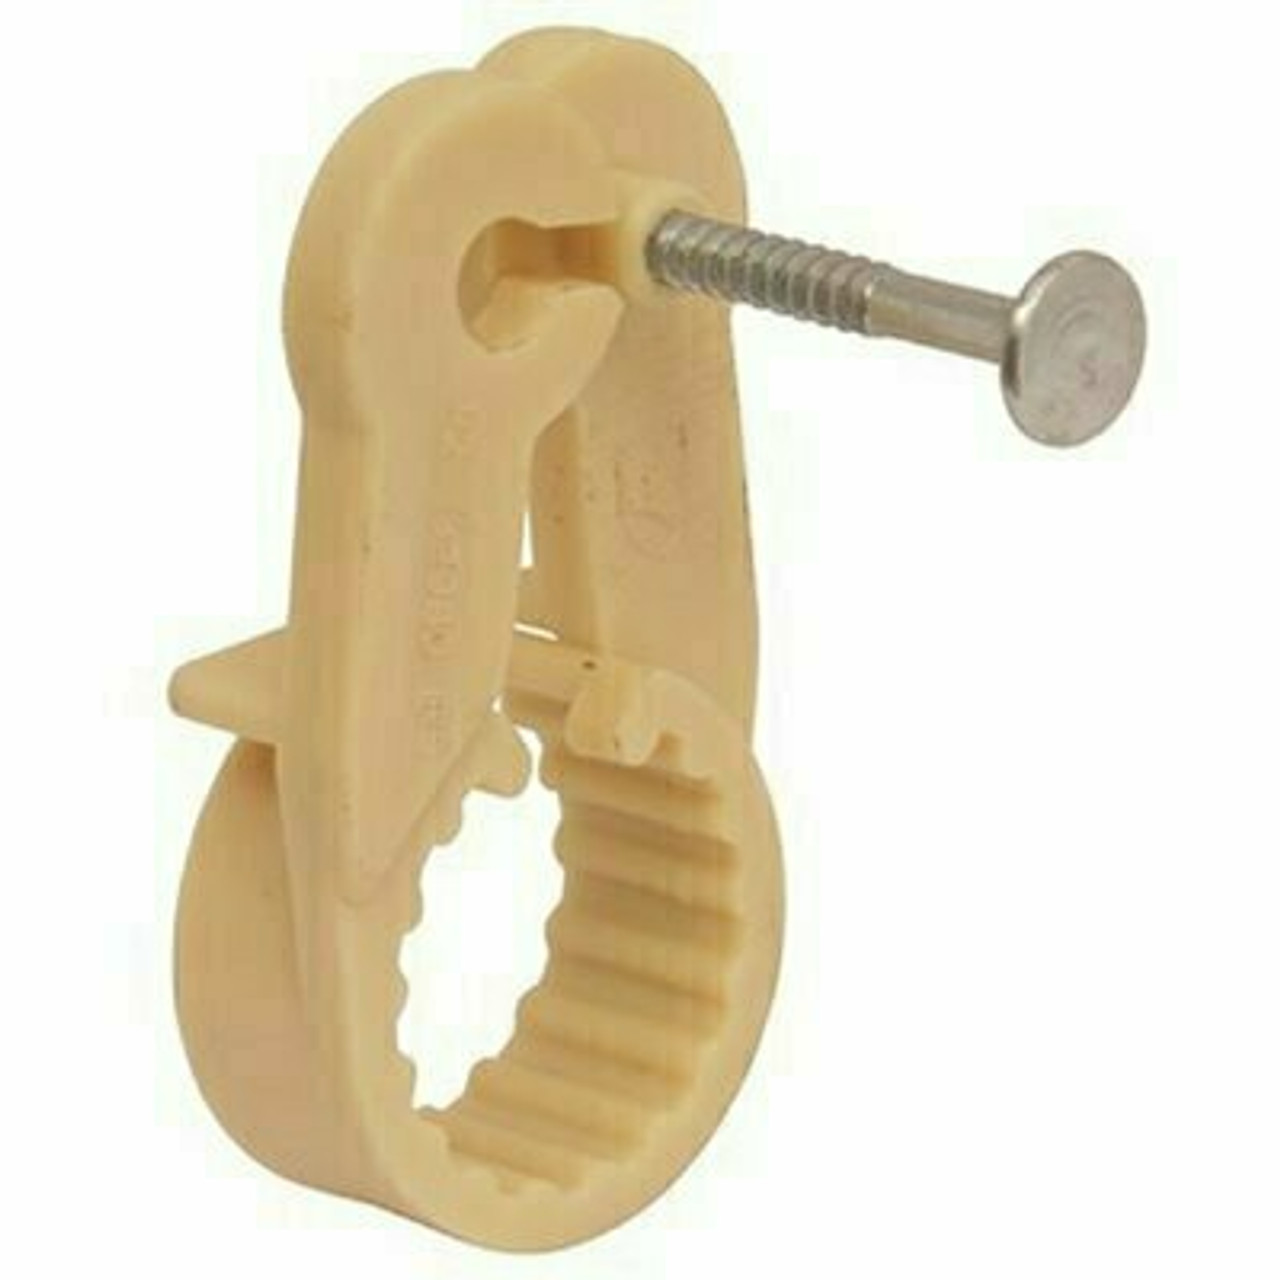 Ips Corporation Water-Tite 82980 Single-Shot Plastic Insulating Suspension Clamp With Preloaded Nail, 1/2-Inch Cts, 50 Pack